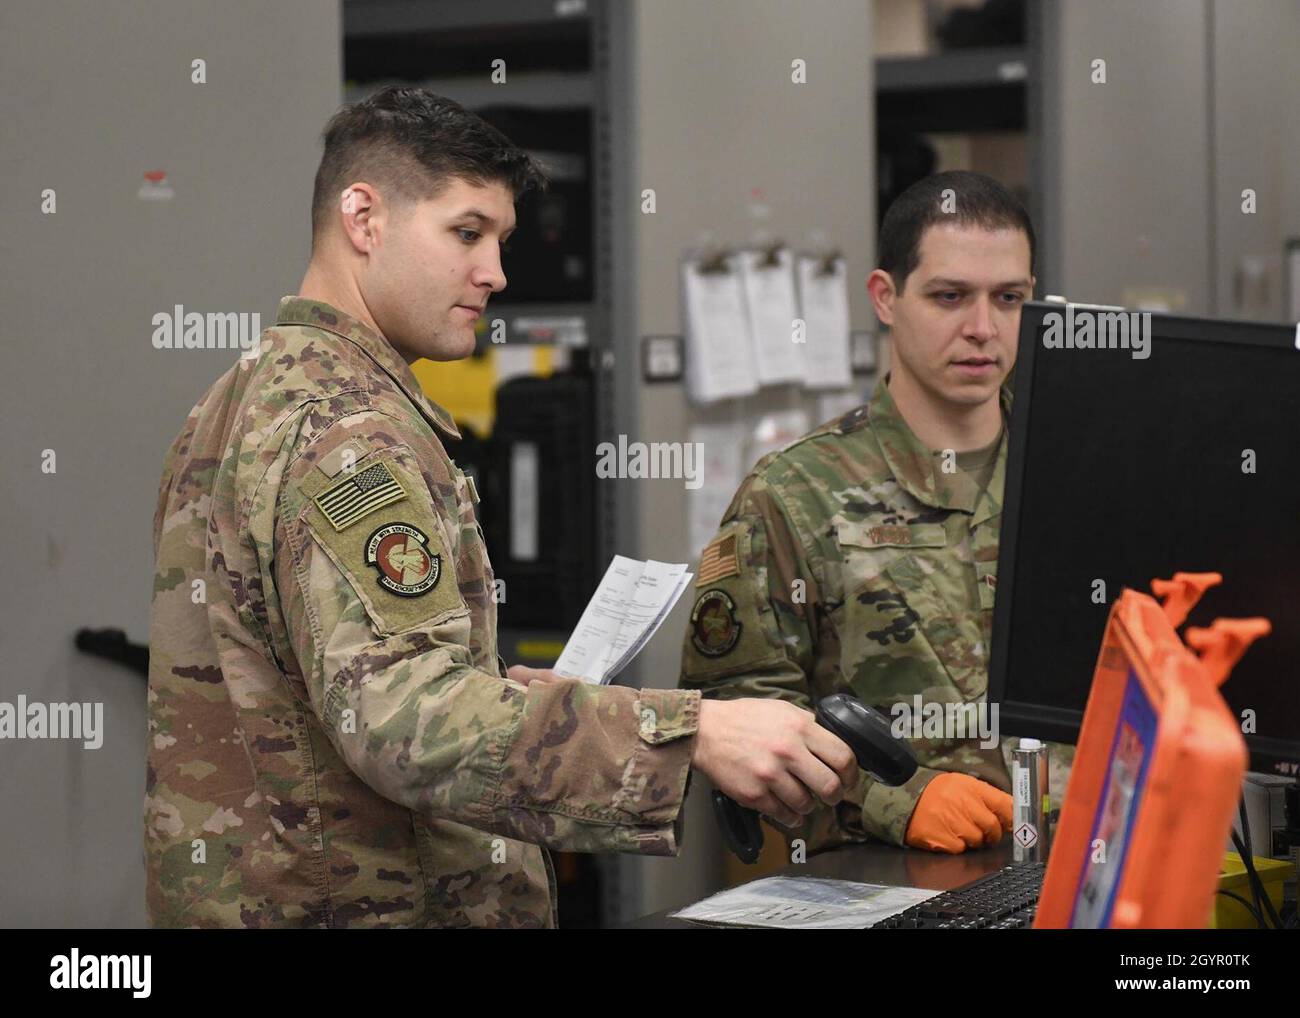 U.S. Air Force Staff Sgts. Ethan Flournoy and James Wood, 314th Aircraft Maintenance Squadron support technicians, scan a tool at Little Rock Air Force Base, Arkansas, Jan. 22, 2020. The 314th Aircraft Maintenance Squadron stood up its active-duty support section recently, which was considered a major milestone in its reconstitution plan, transitioning the squadron from civilian contractors to military personnel. (U.S. Air Force photo by Airman 1st Class Jayden Ford) Stock Photo